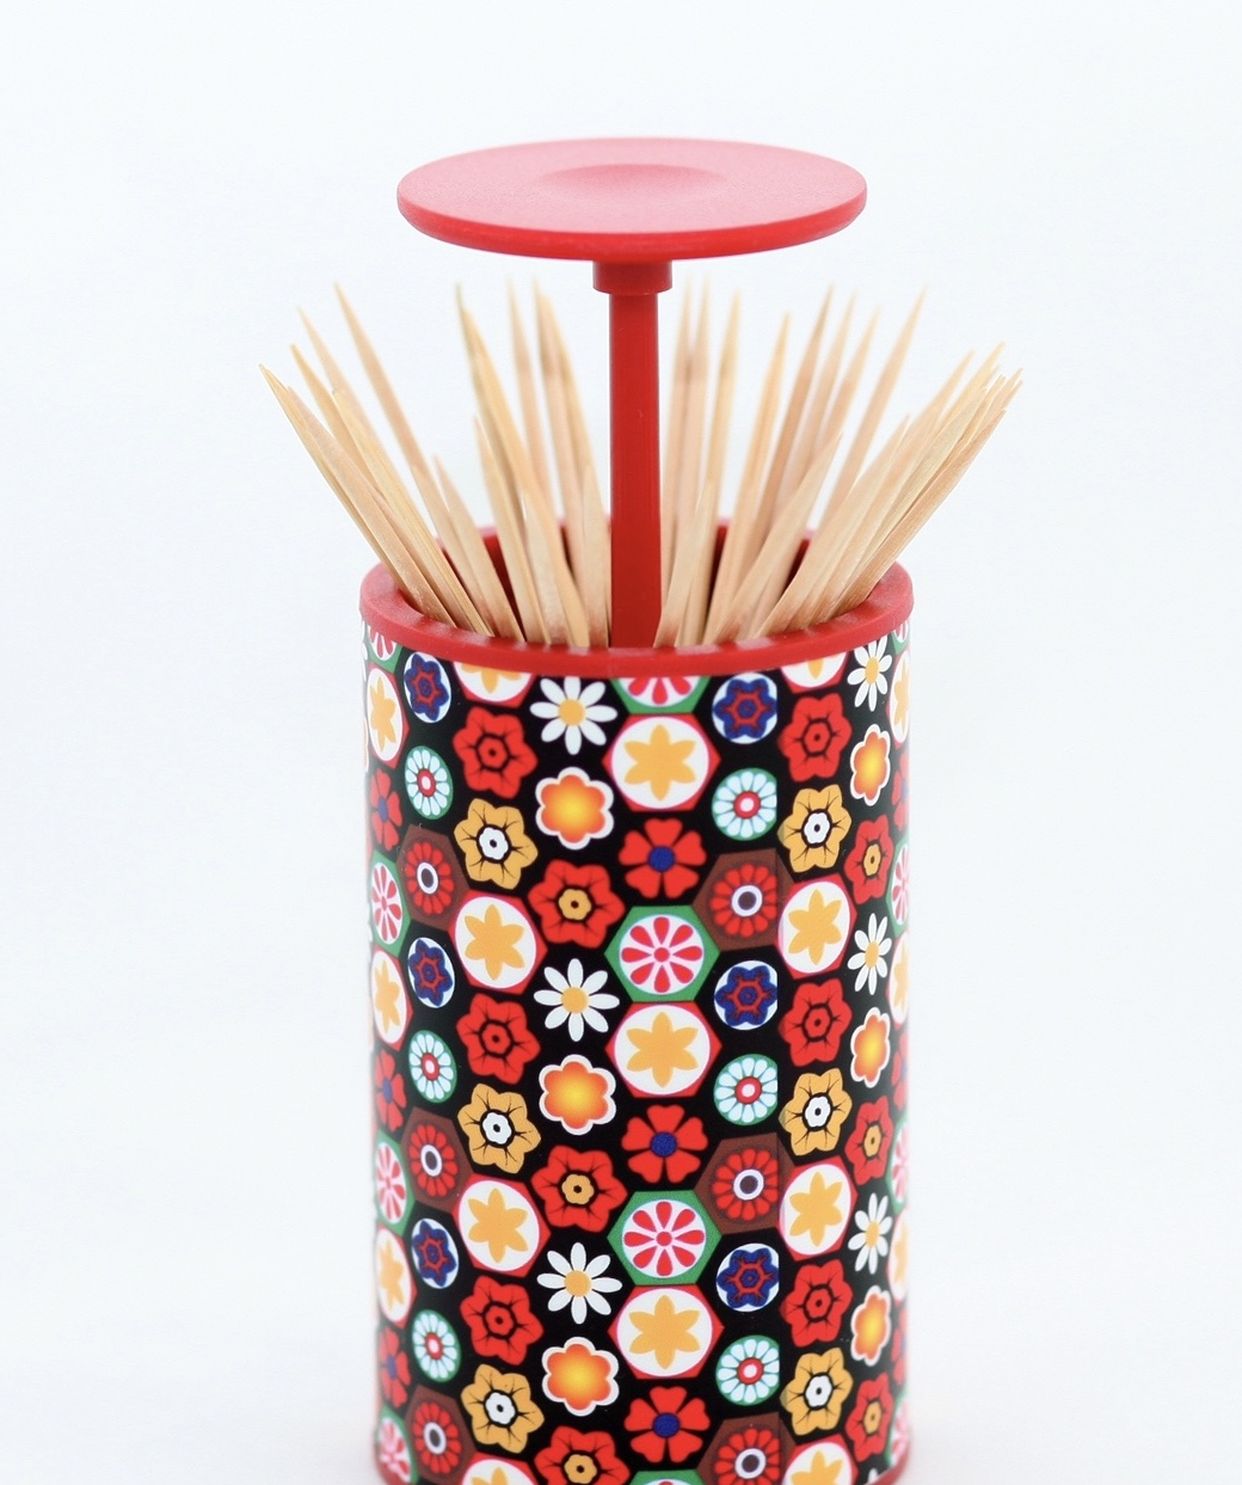 Toothpick Holder And Dispenser - Stylish And Modern